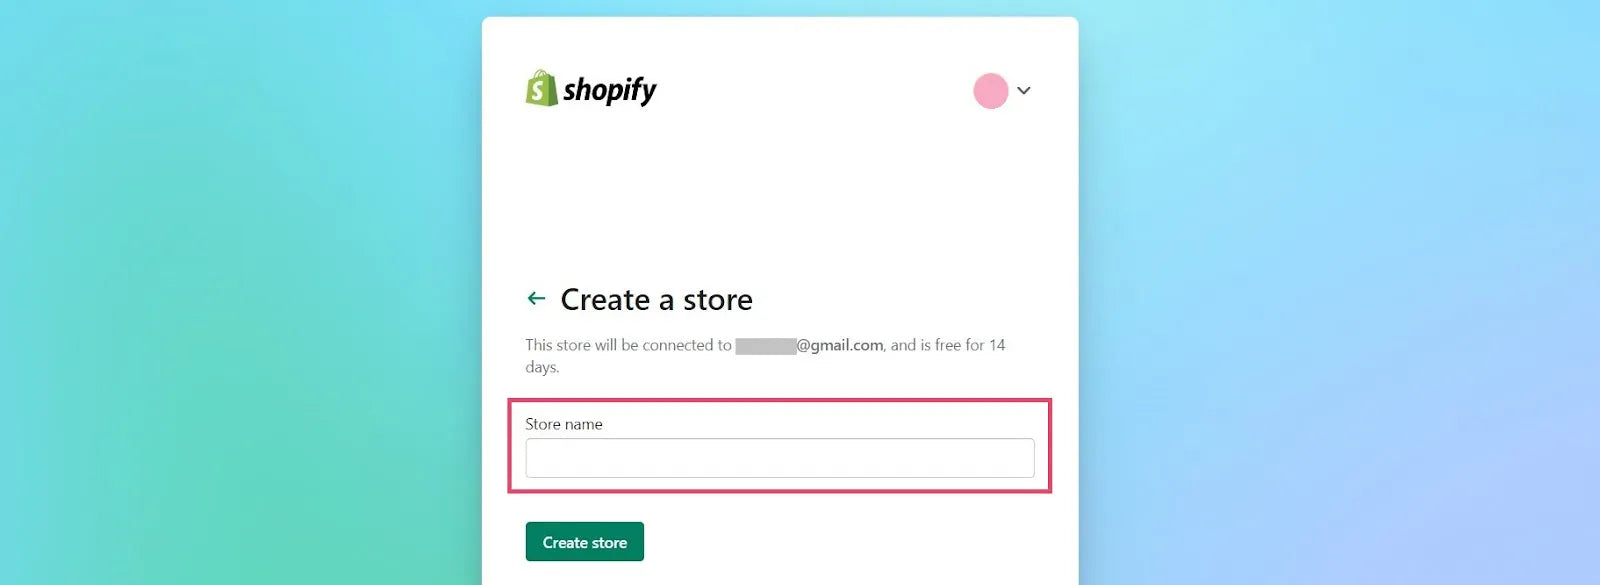 Shopify page to “Create a store”